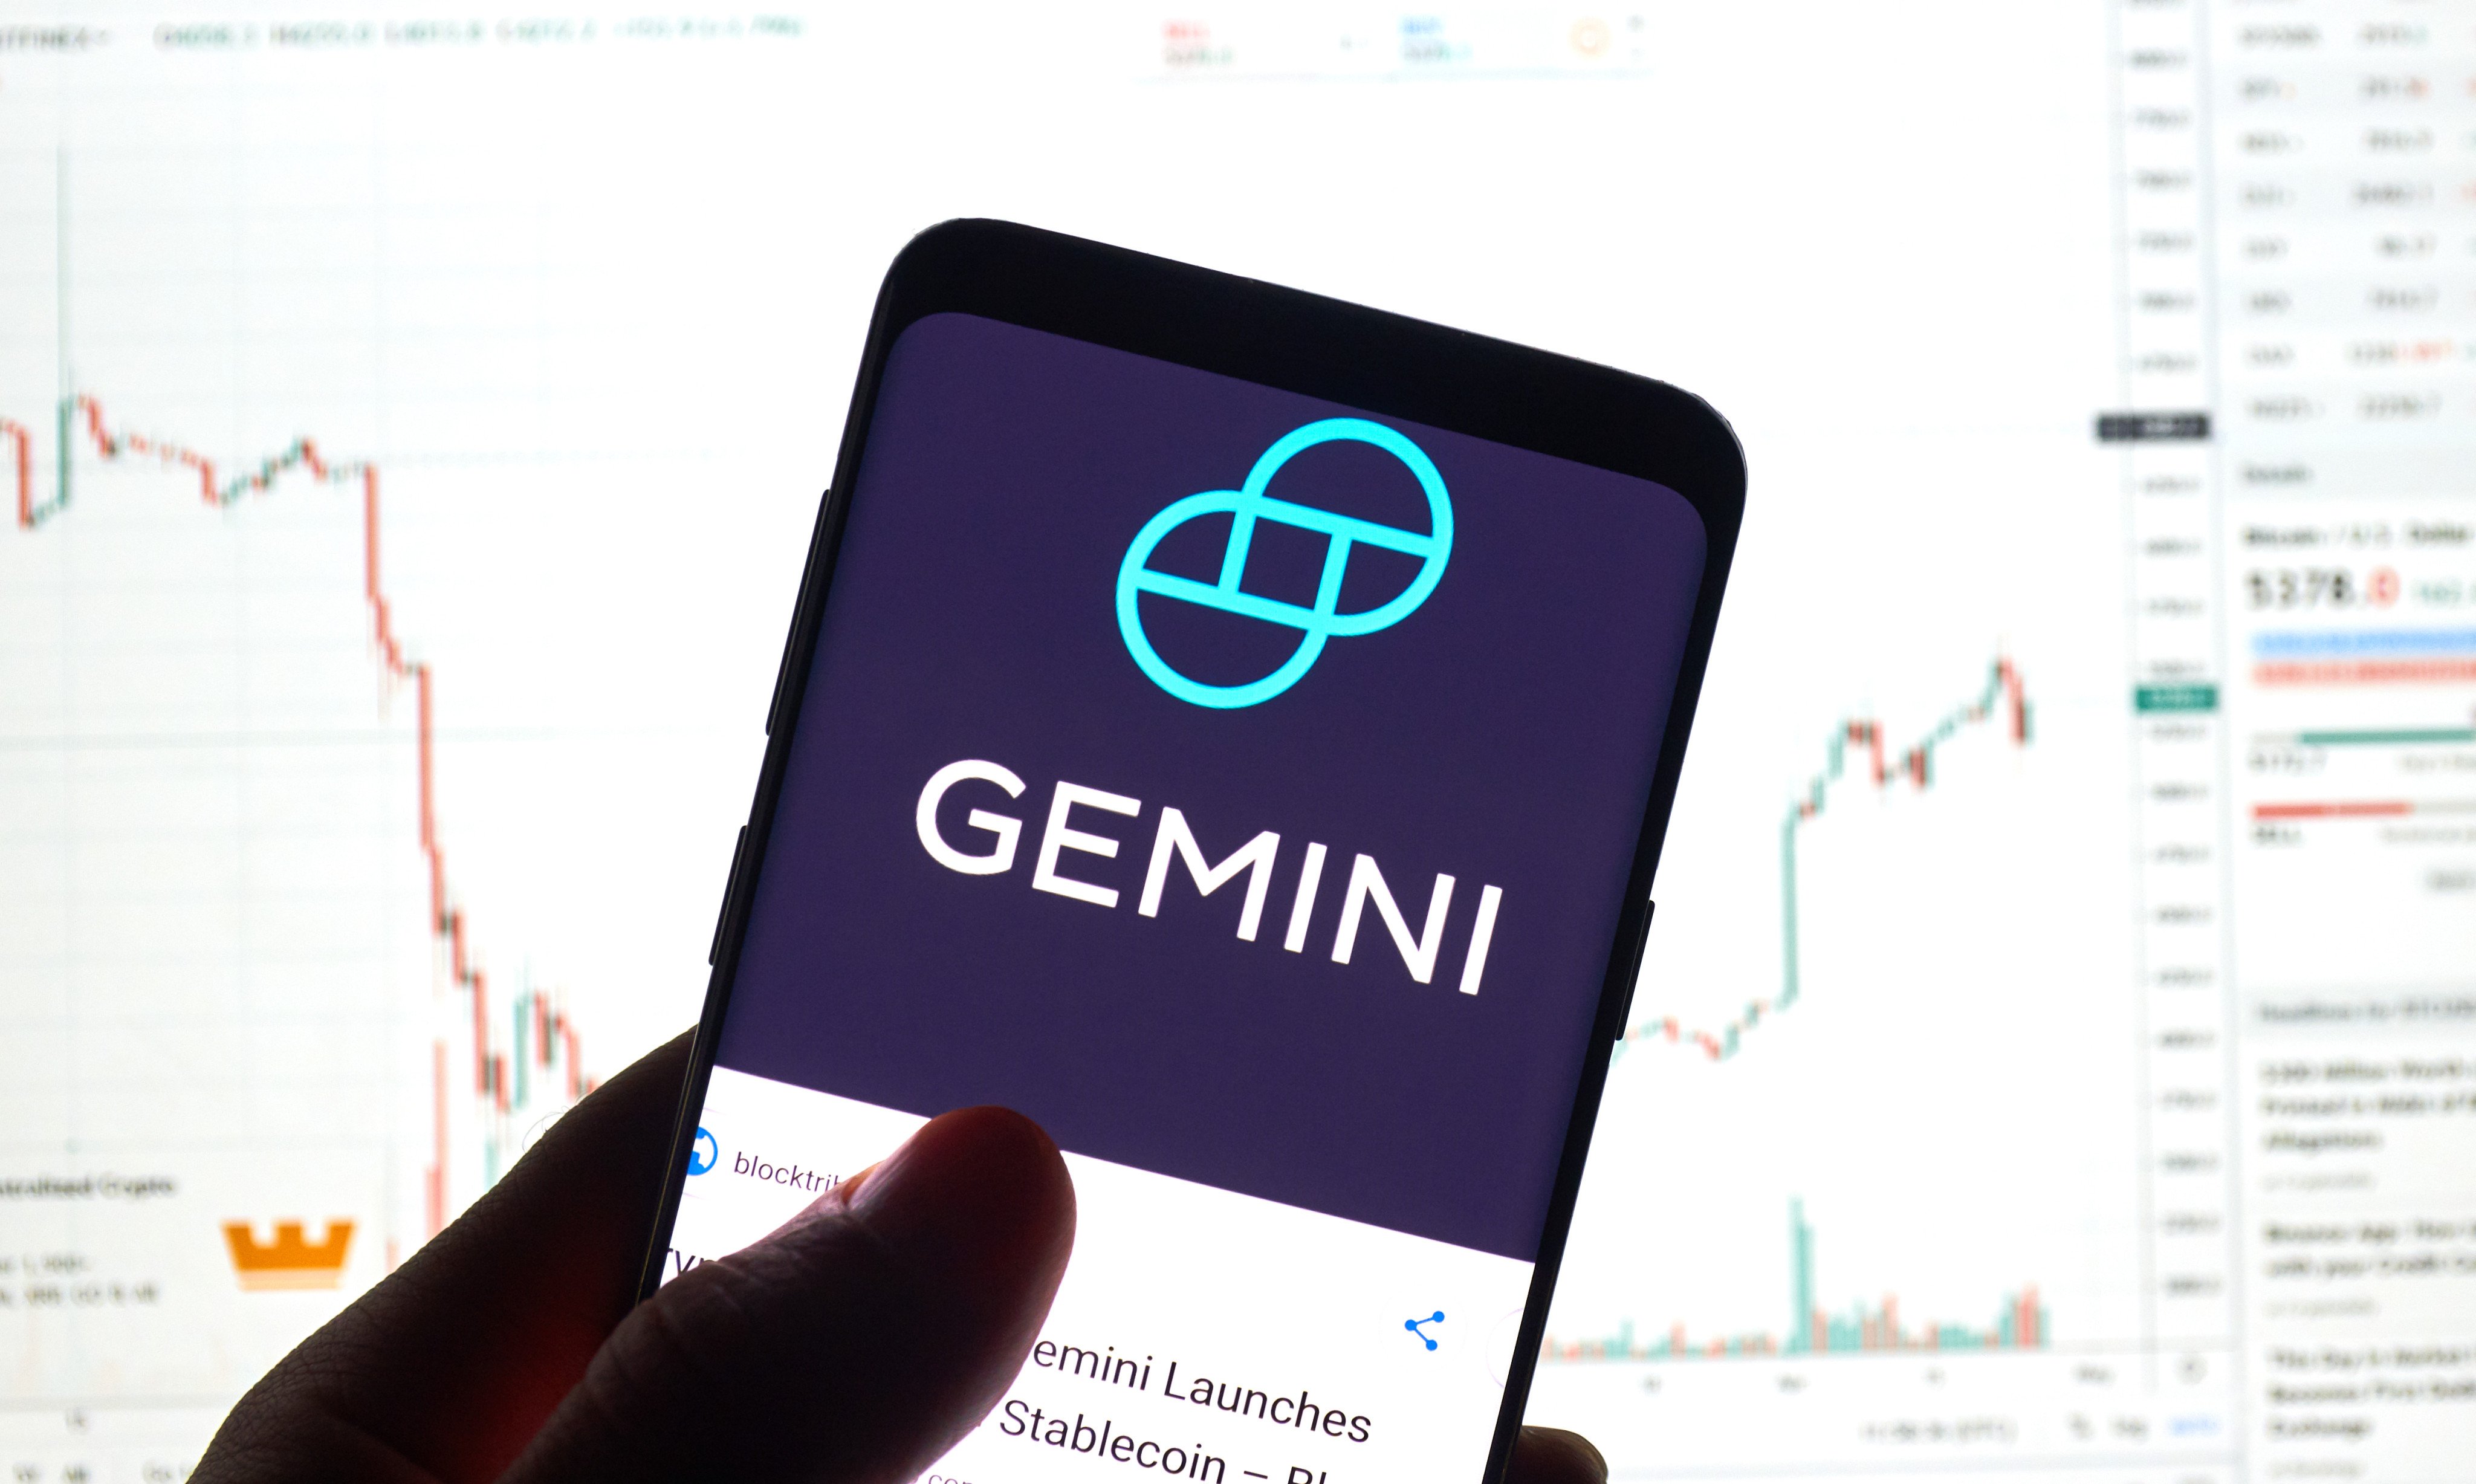 Gemini cryptocurrency exchange logo seen on a Samsung Galaxy S9 Plus. Gemini said traditional financial regulations are not equipped to protect investors in decentralised finance, so new rules are needed. Photo: Shutterstock